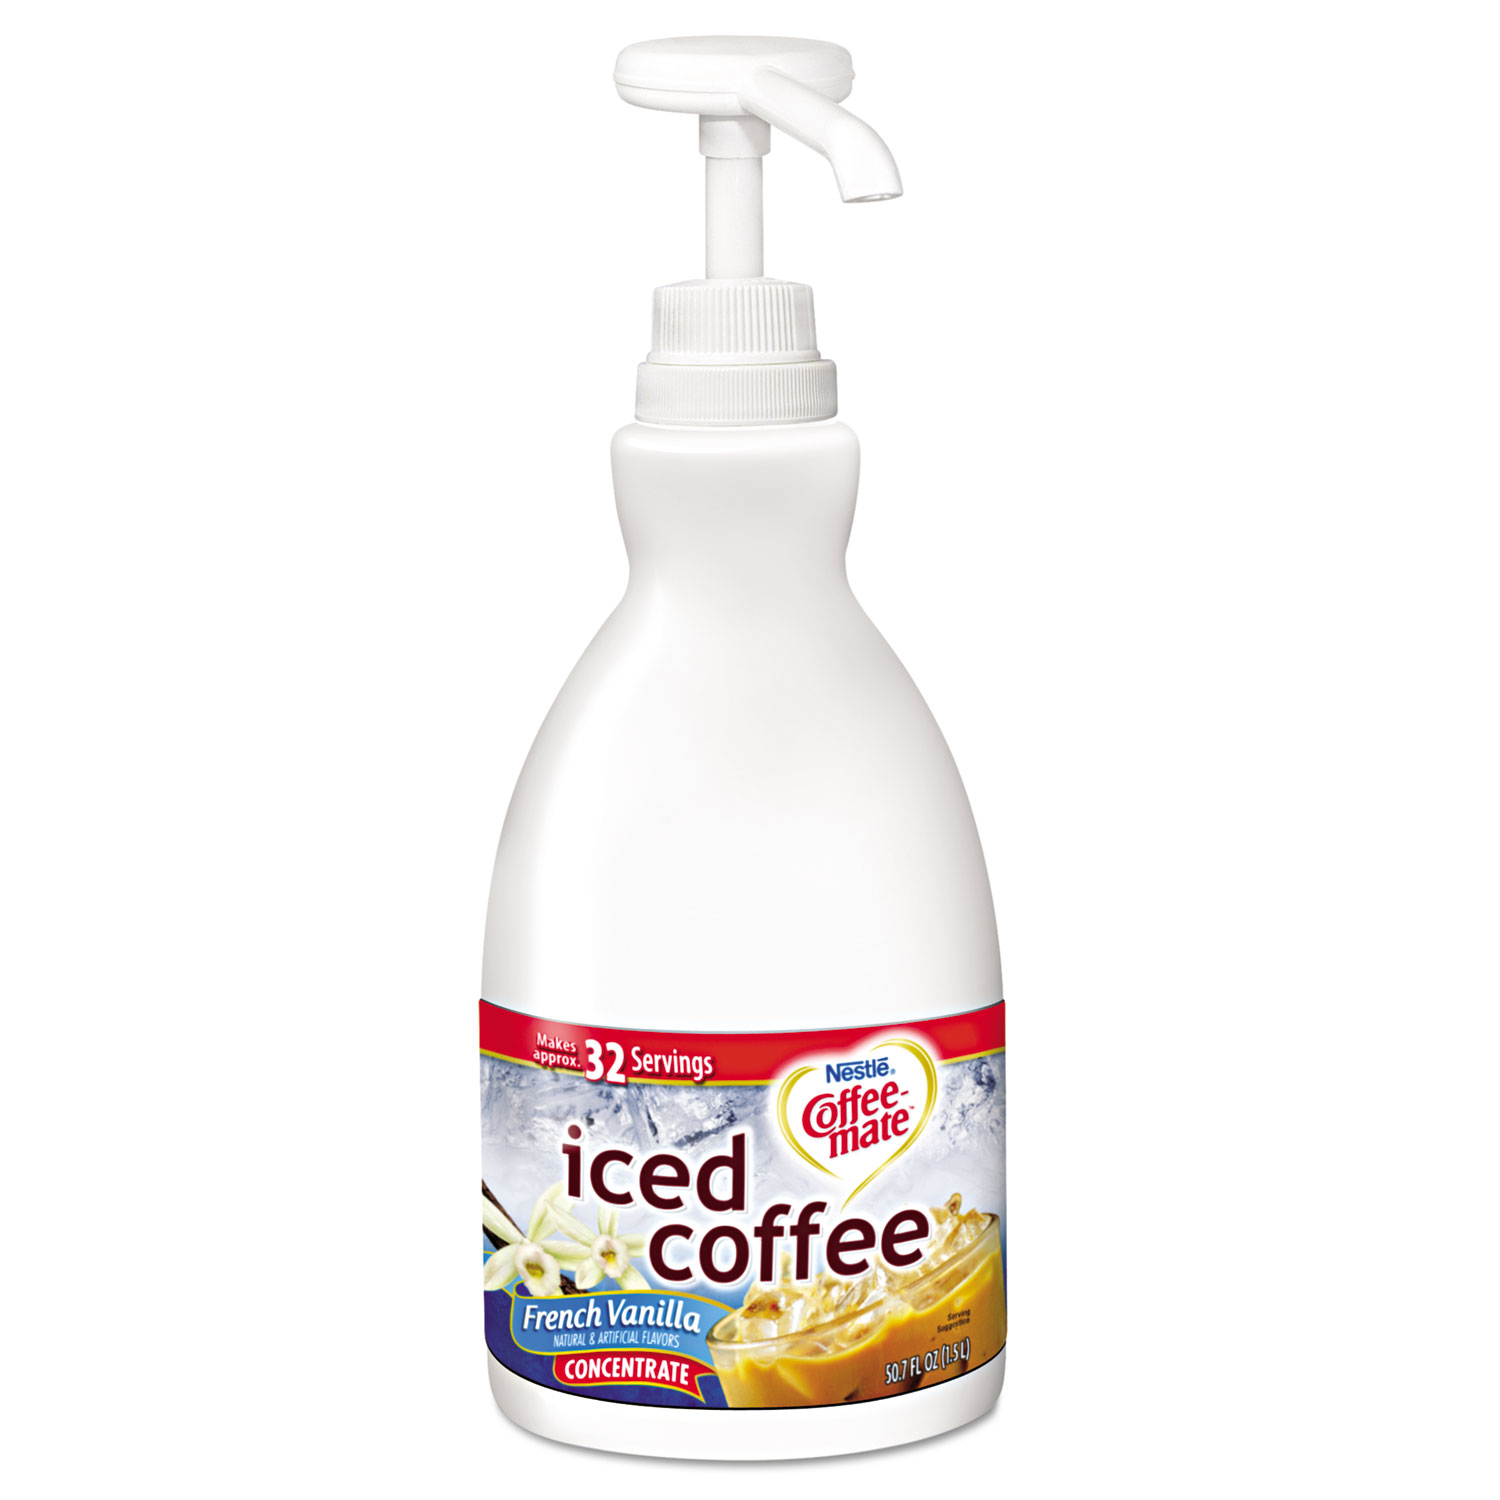 Concentrated Iced Coffee, French Vanilla, 1.5 L Pump Bottle